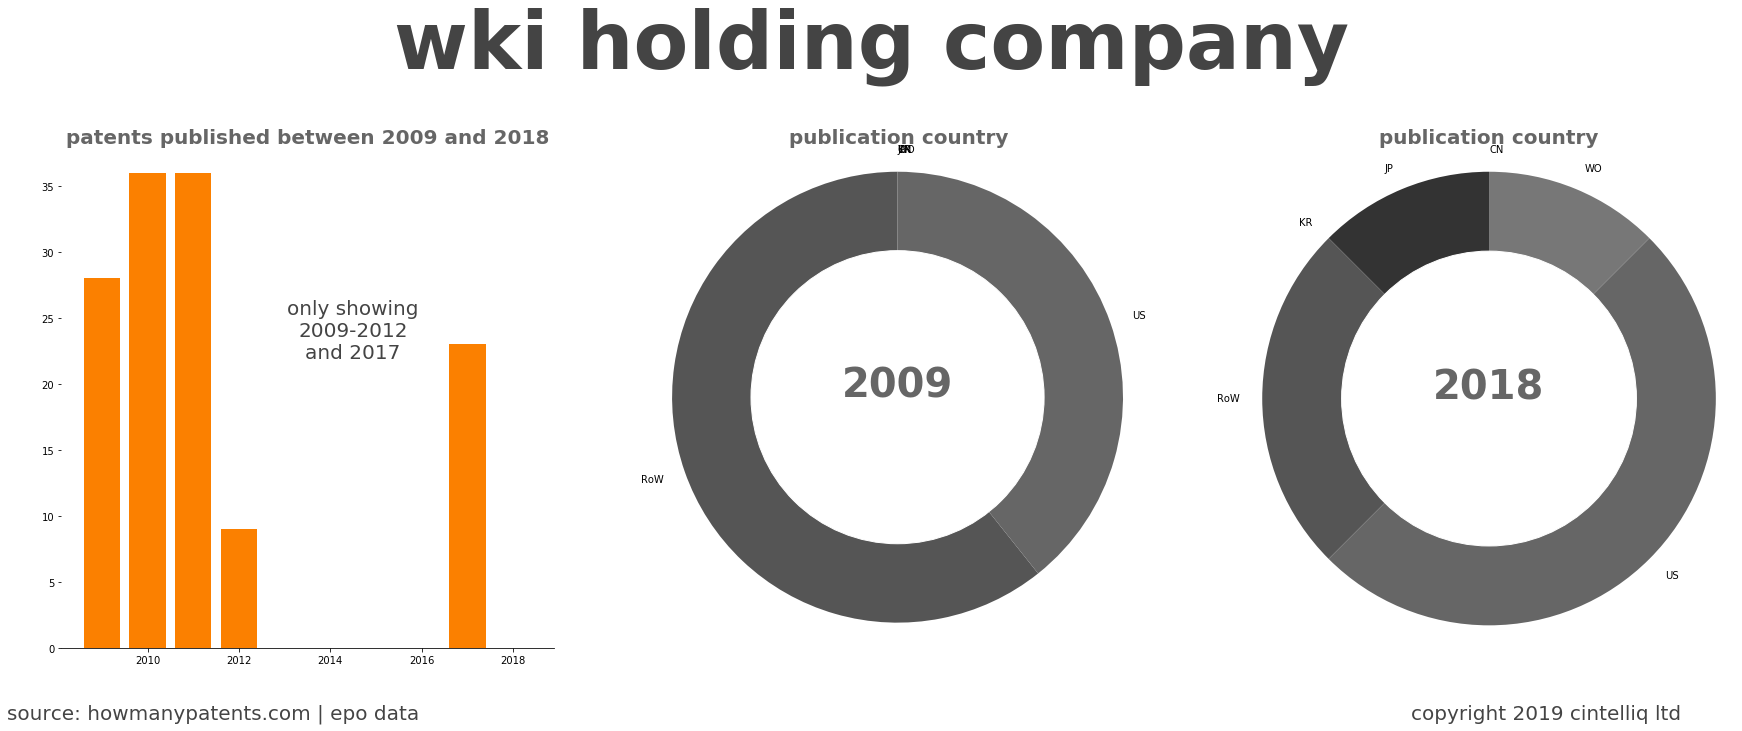 summary of patents for Wki Holding Company